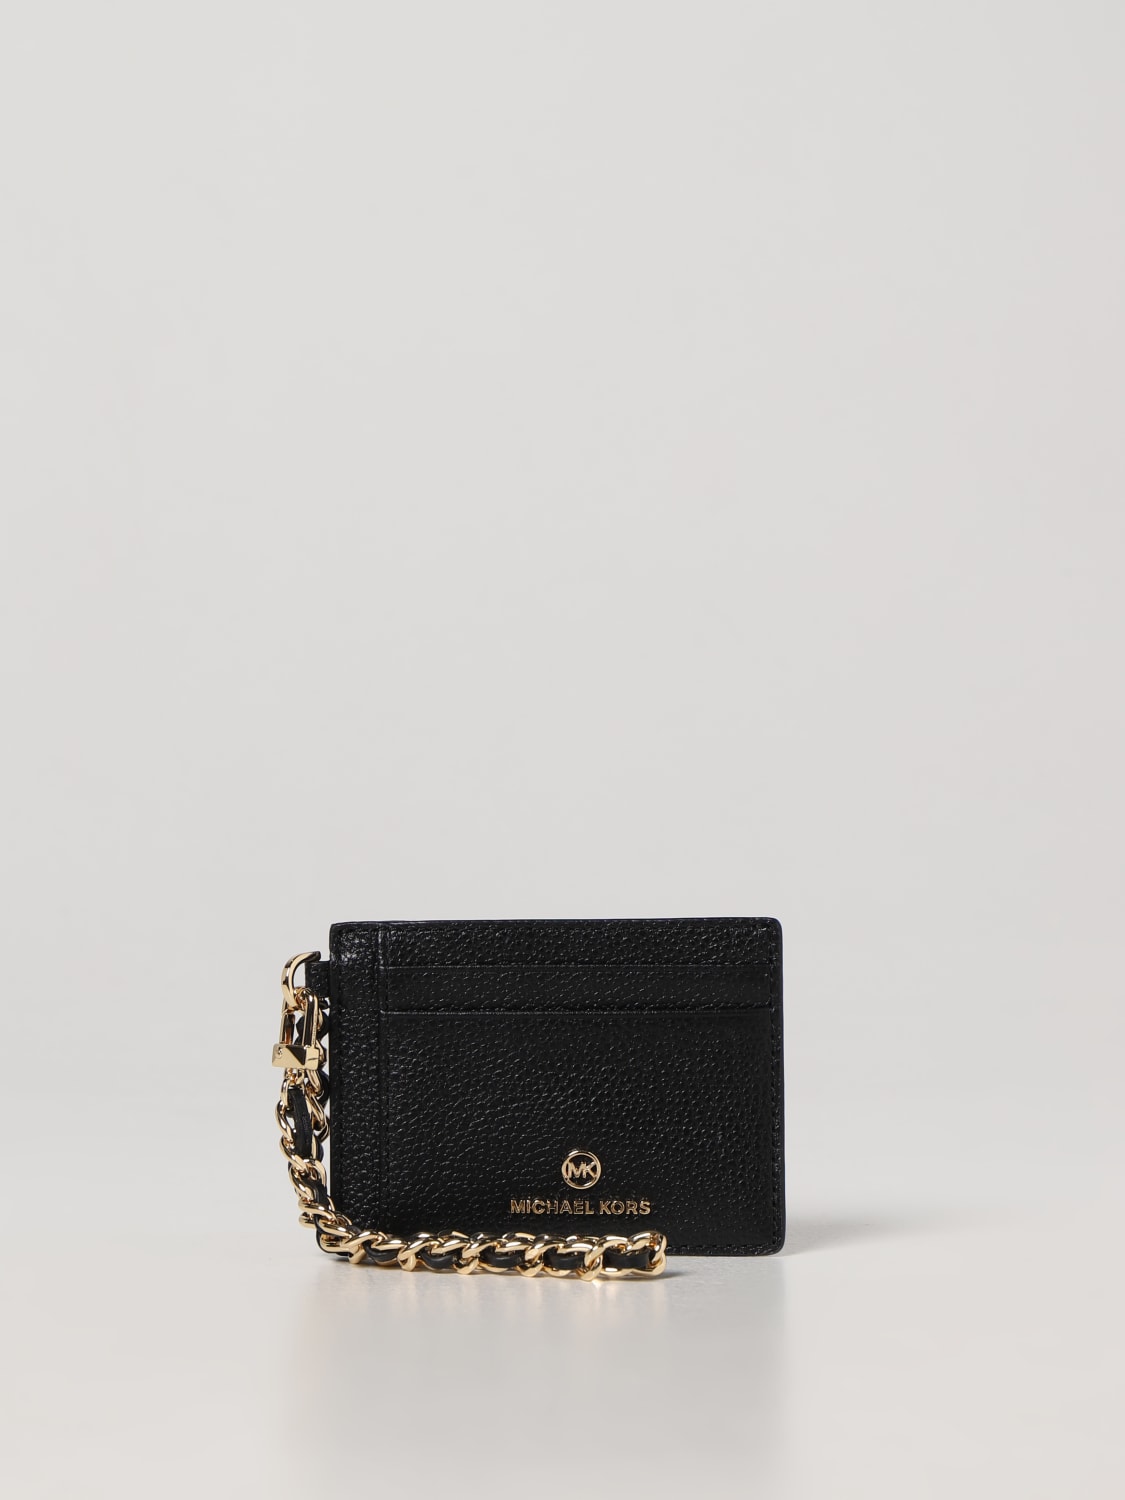 Michael Kors Wallets and cardholders for Women